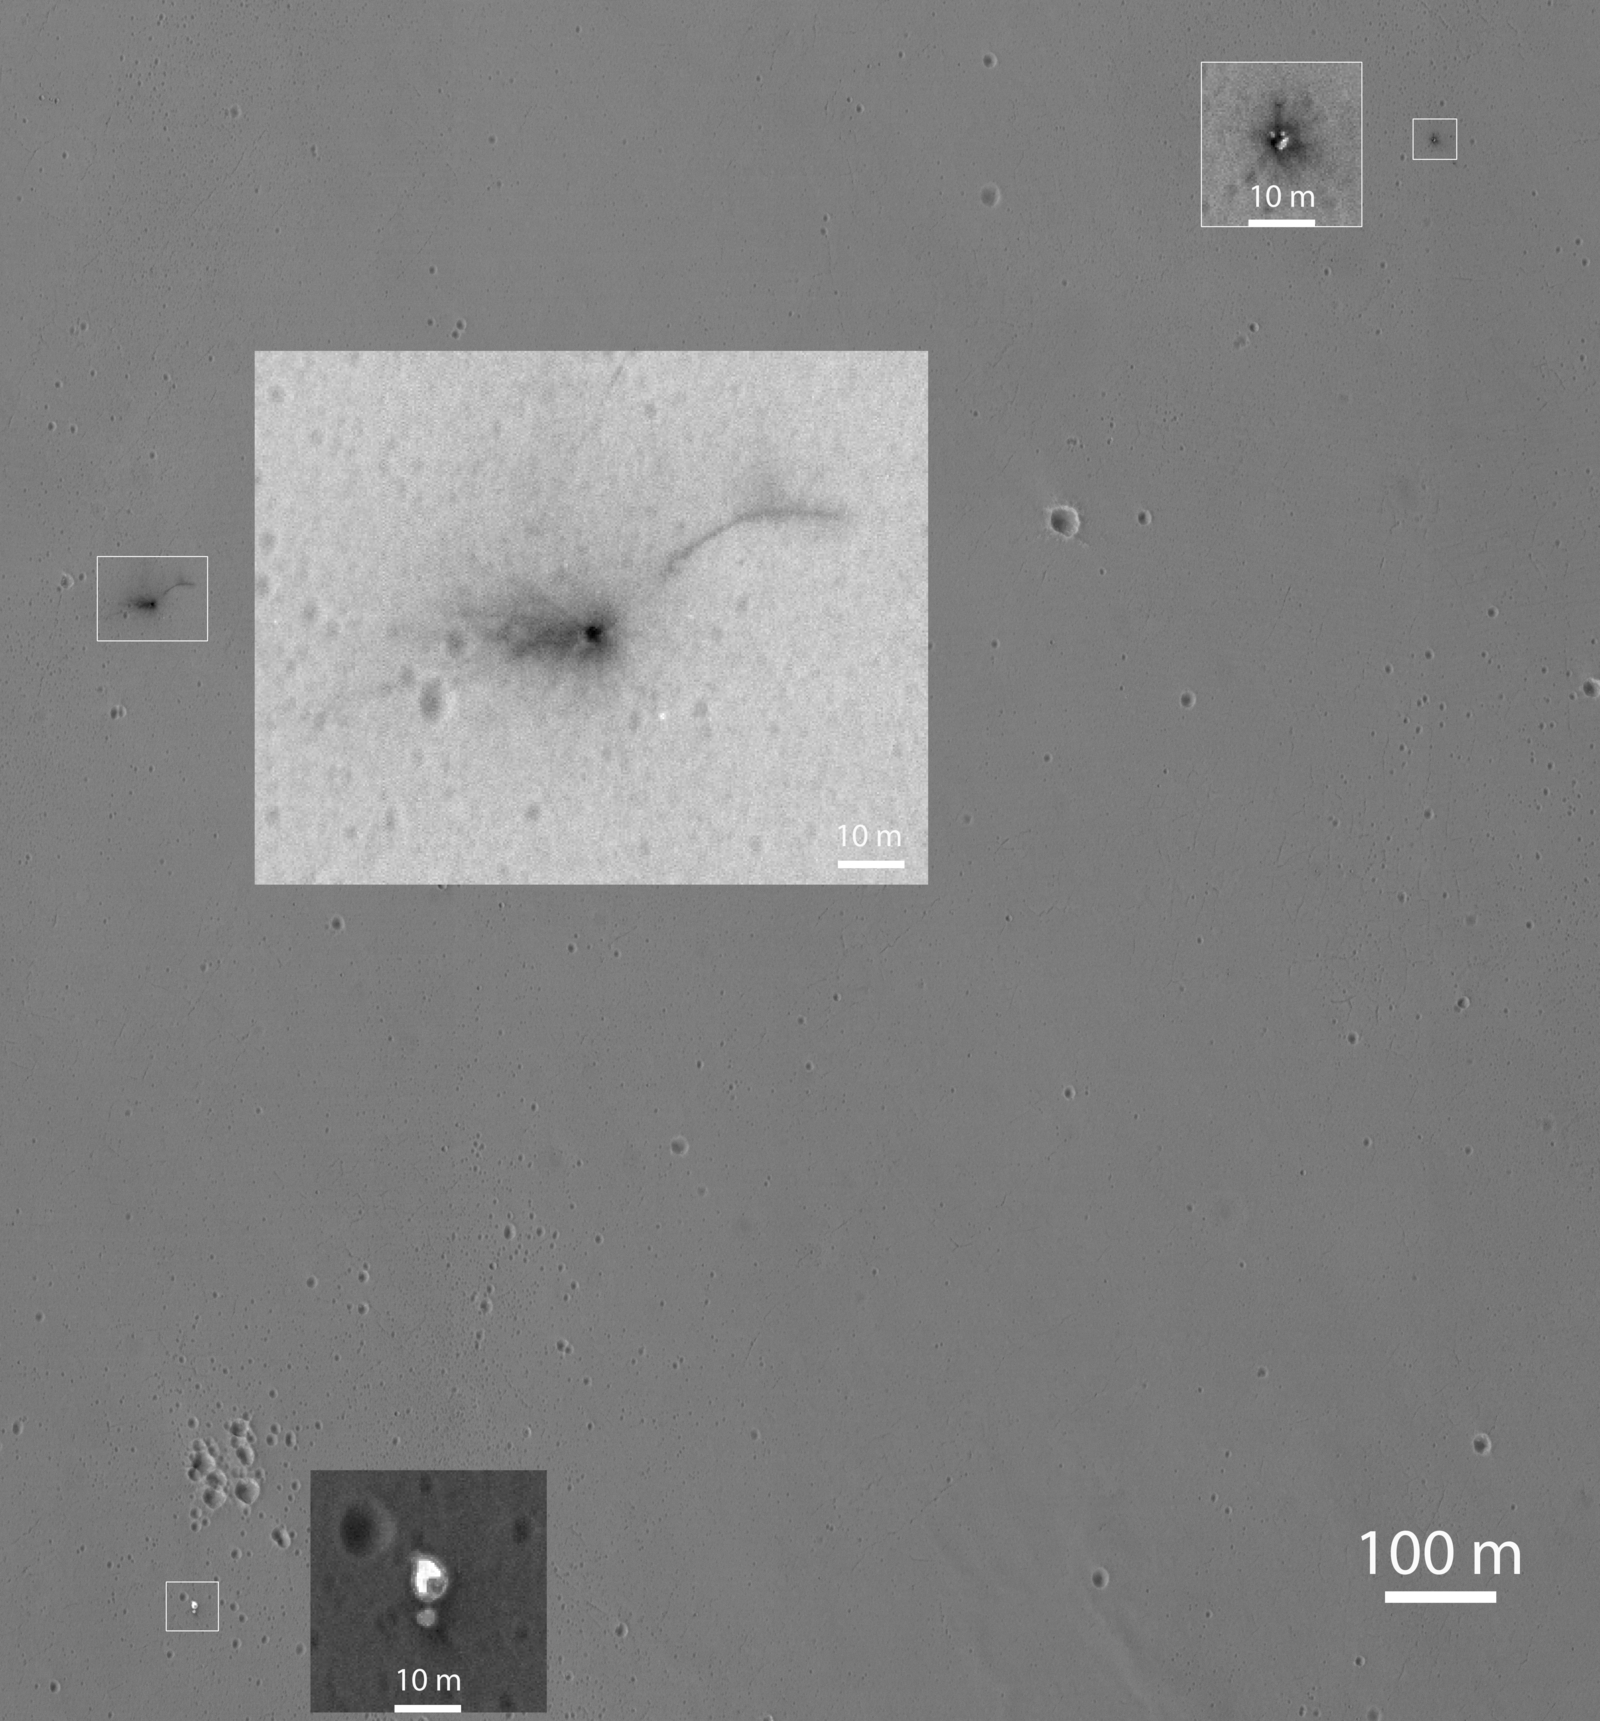 This Oct. 25, 2016, image from the HiRISE camera on NASA's Mars Reconnaissance Orbiter shows the area where the Europe's Schiaparelli test lander struck Mars, with magnified insets of three sites where spacecraft components hit the ground. It adds detail not seen in earlier imaging of the site.